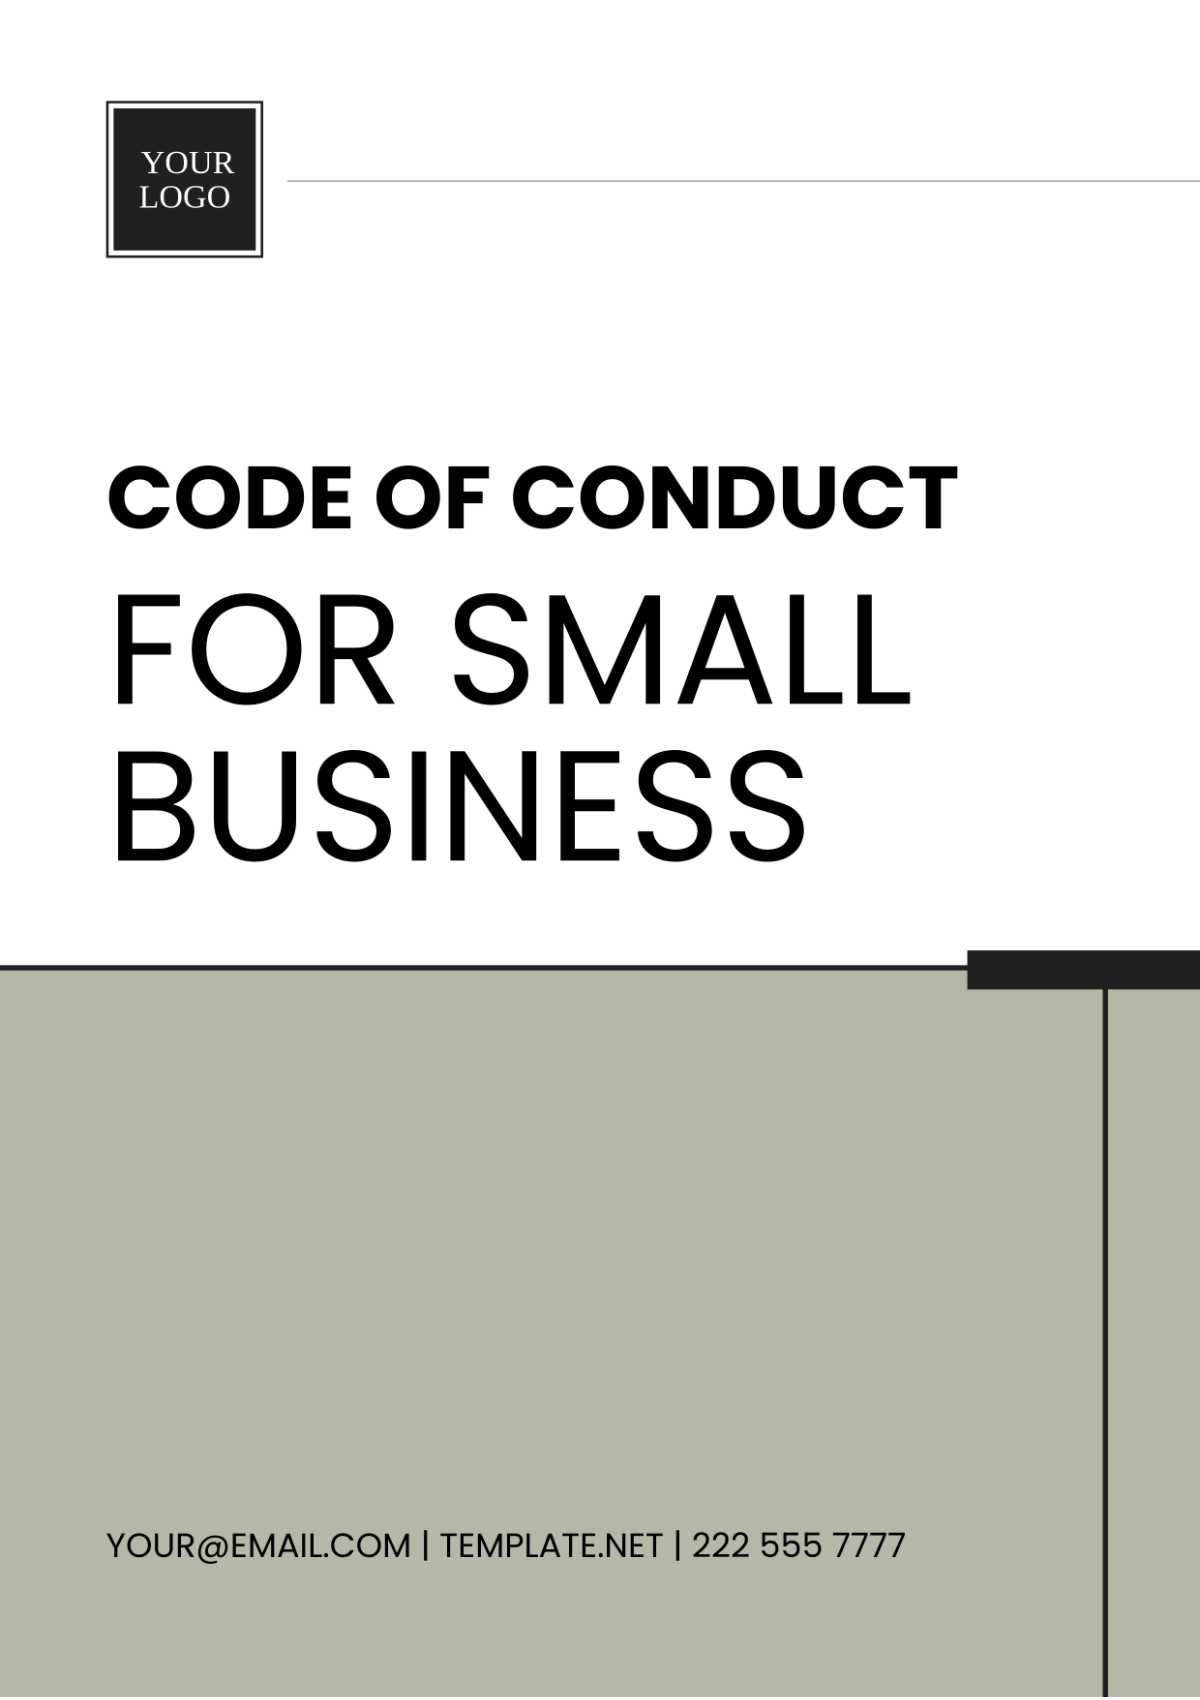 Code of Conduct for Small Business Template